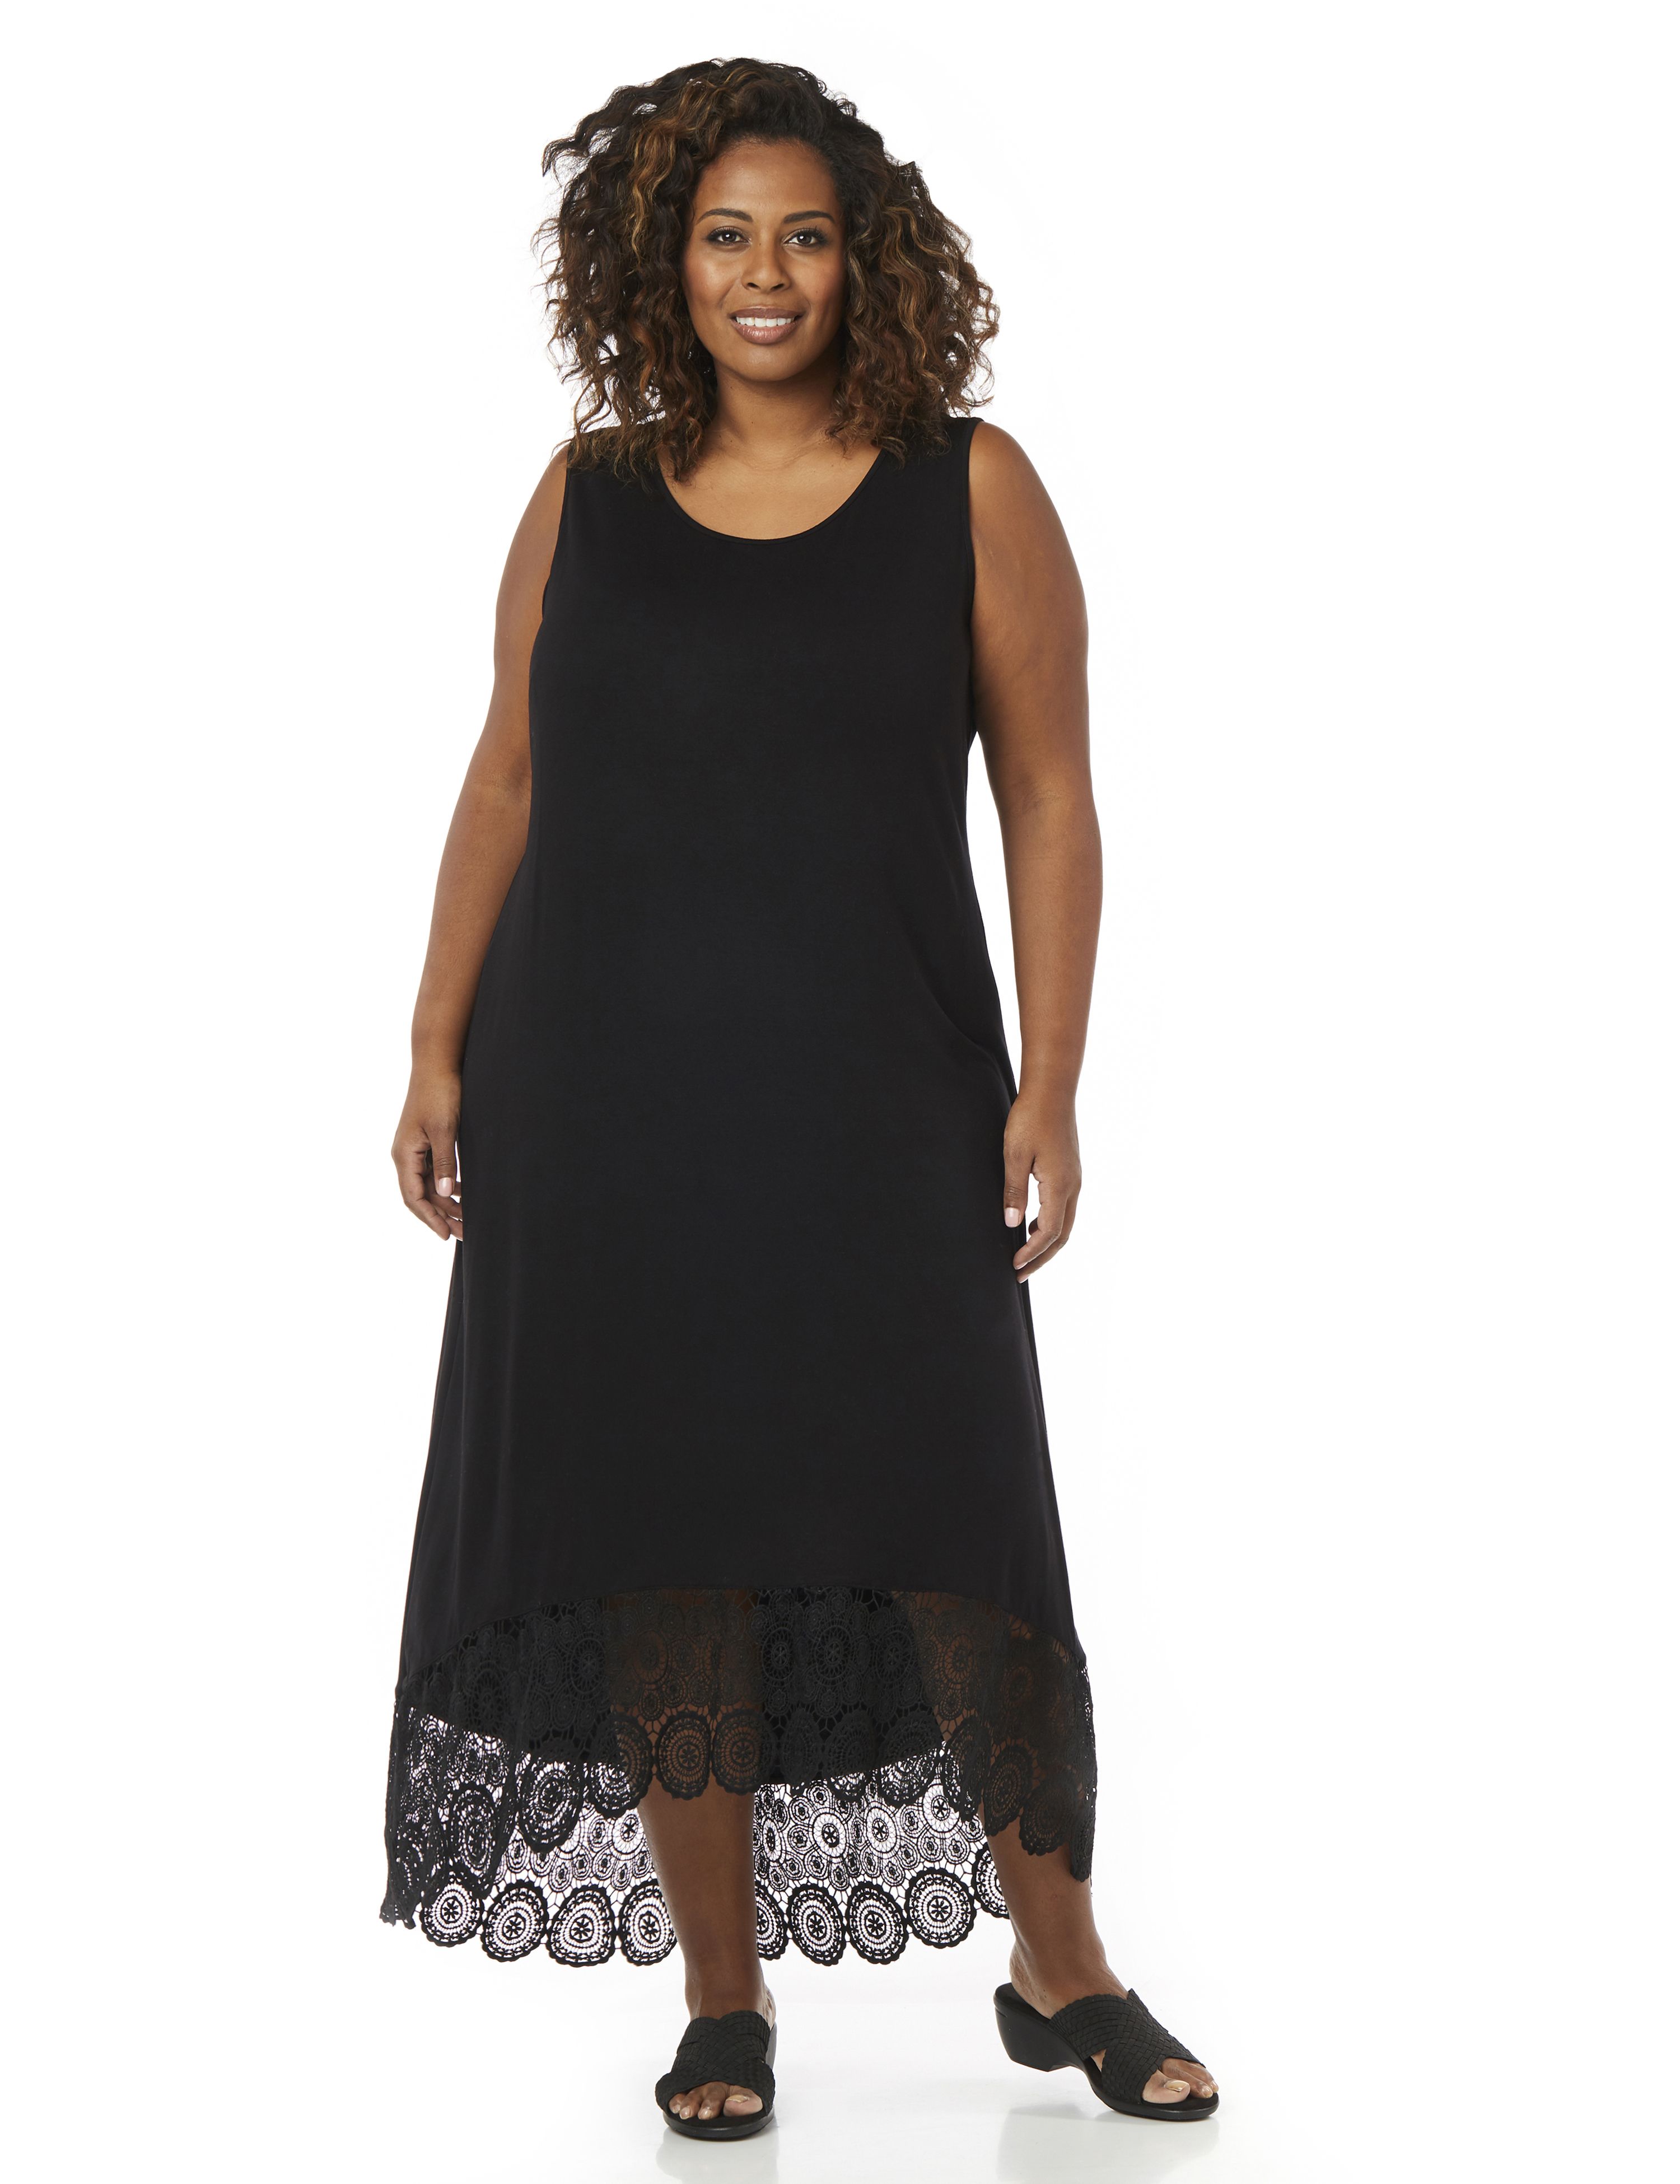 Shop 1920s Plus Size Dresses and Costumes